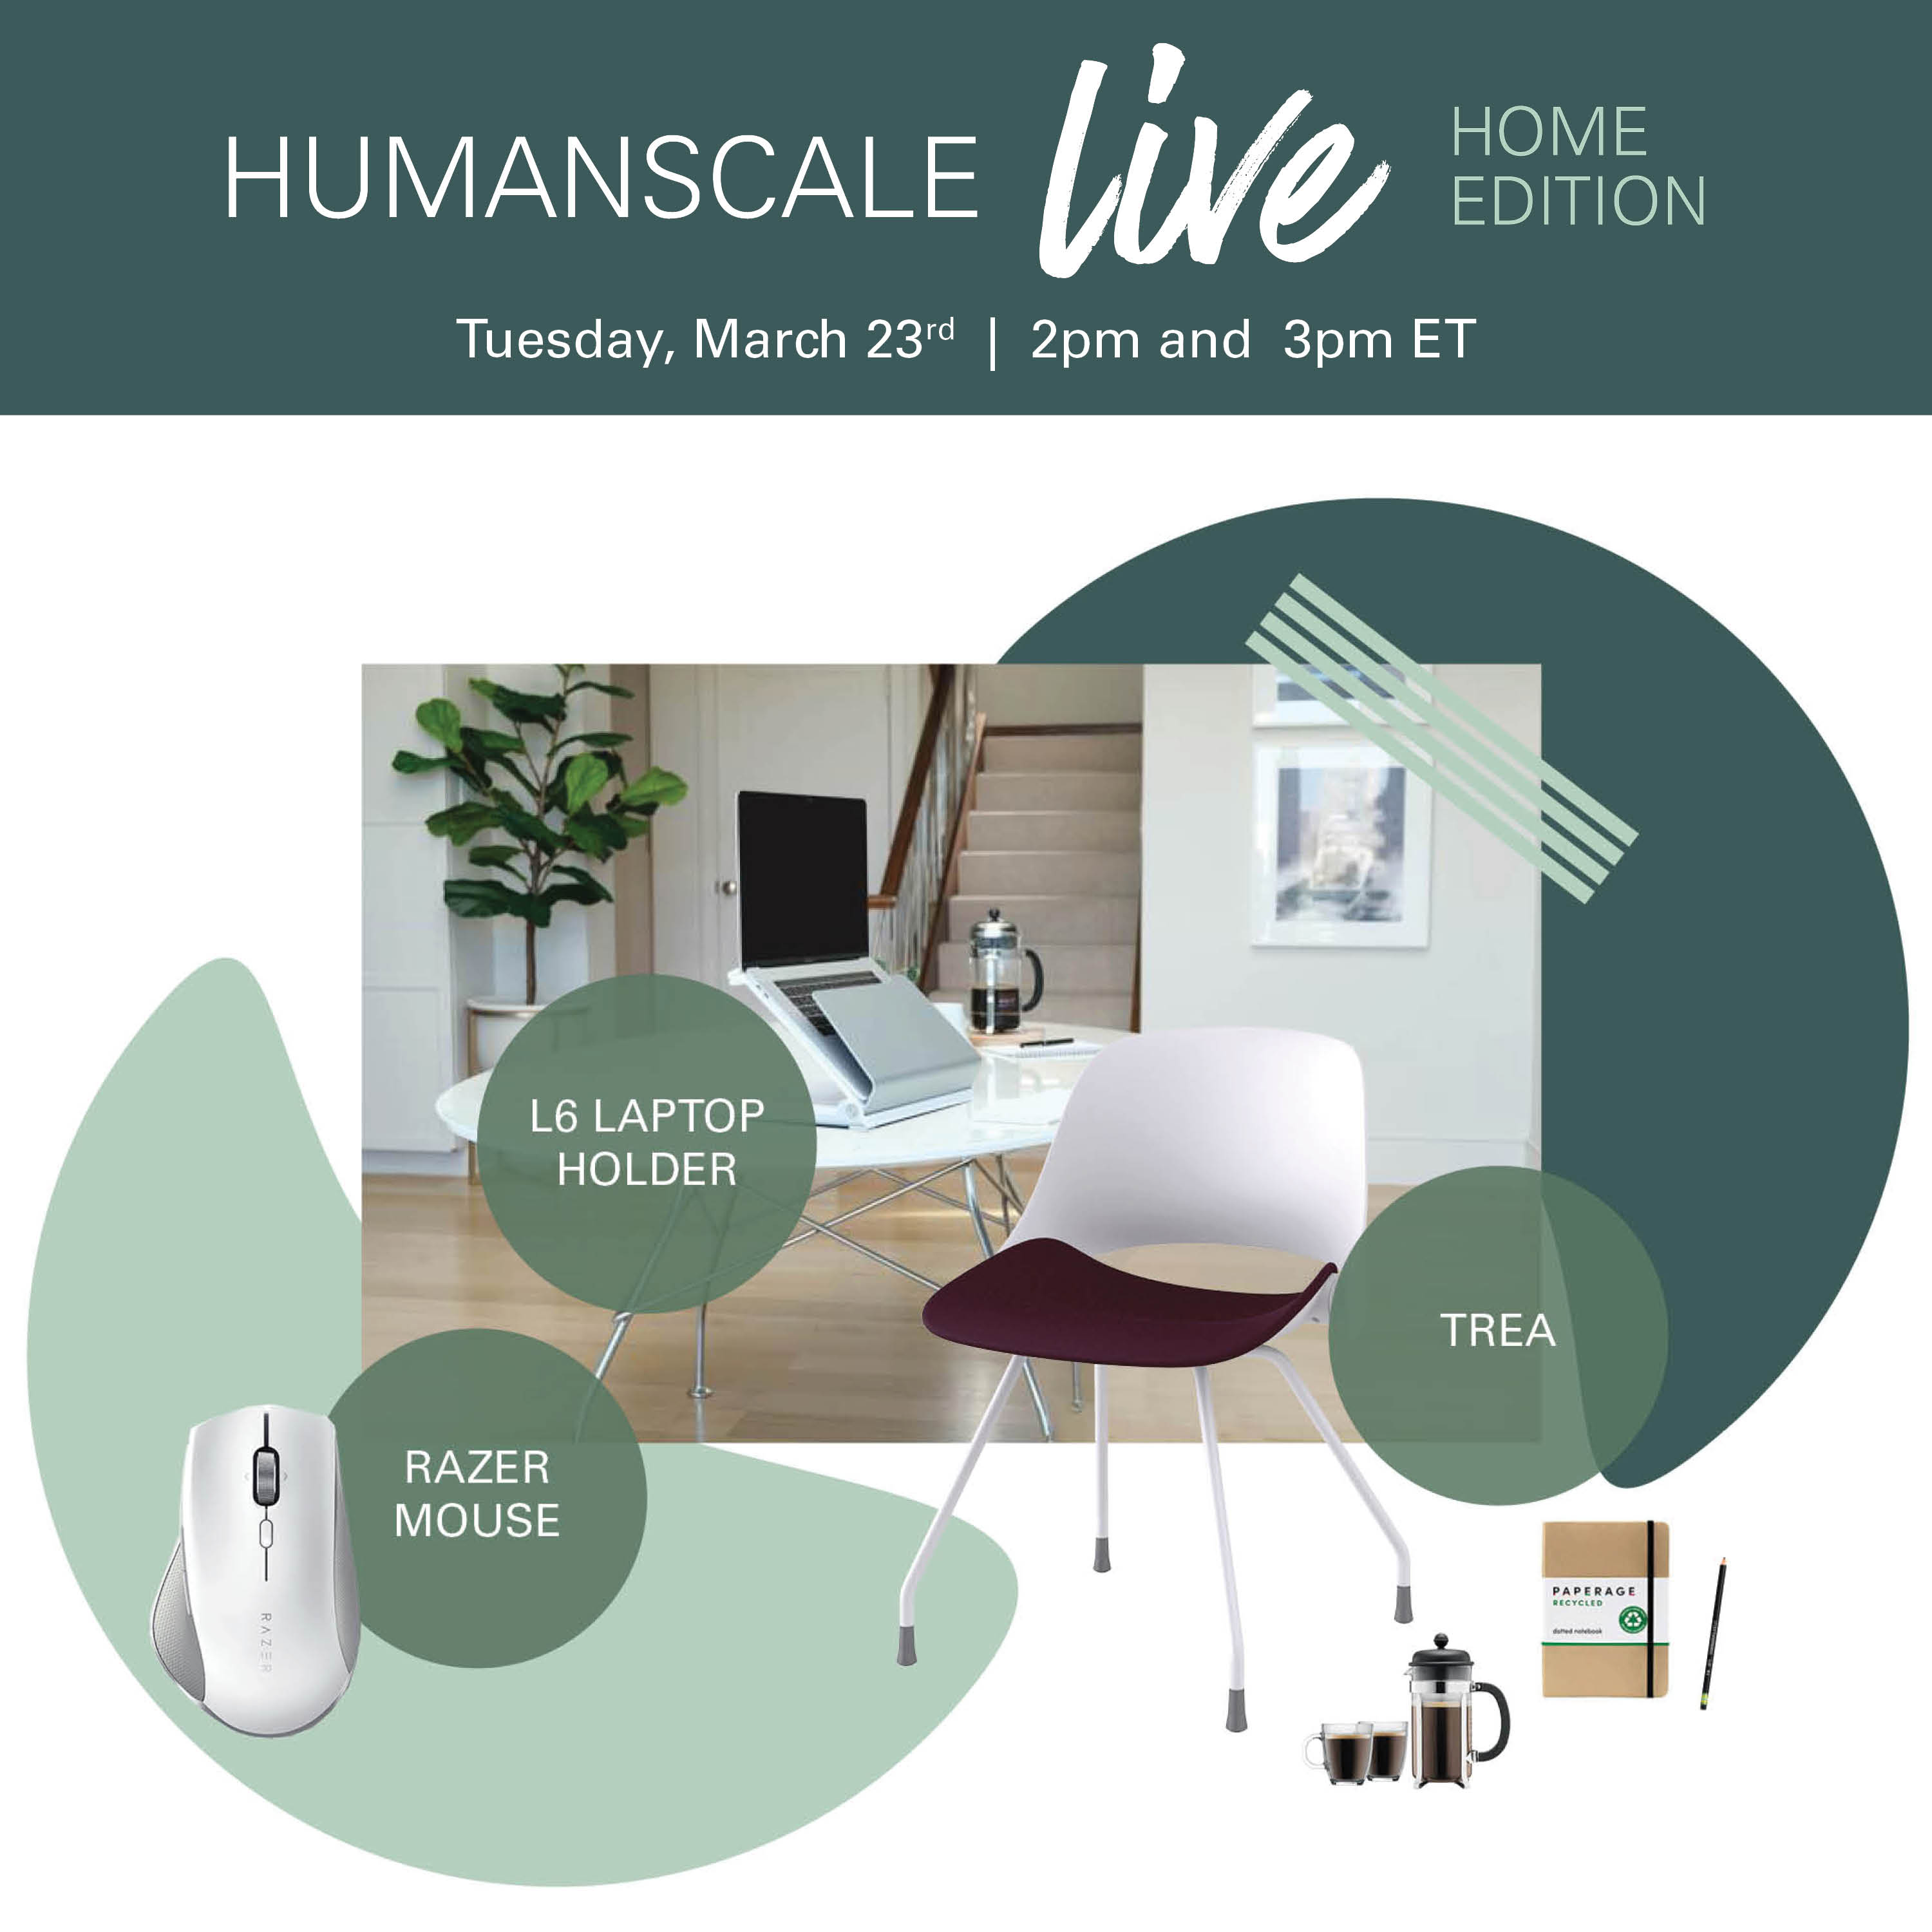 On Tuesday, March 23 (2pm + 3pm EDT) tune in to Humanscale LIVE as the brand's expert hosts answer your questions in real—time and share their tips and tricks to build the ideal WFH setup, no matter your space — whether it's the kitchen counter, bedroom, or home office. Register at humanscale.com/live.